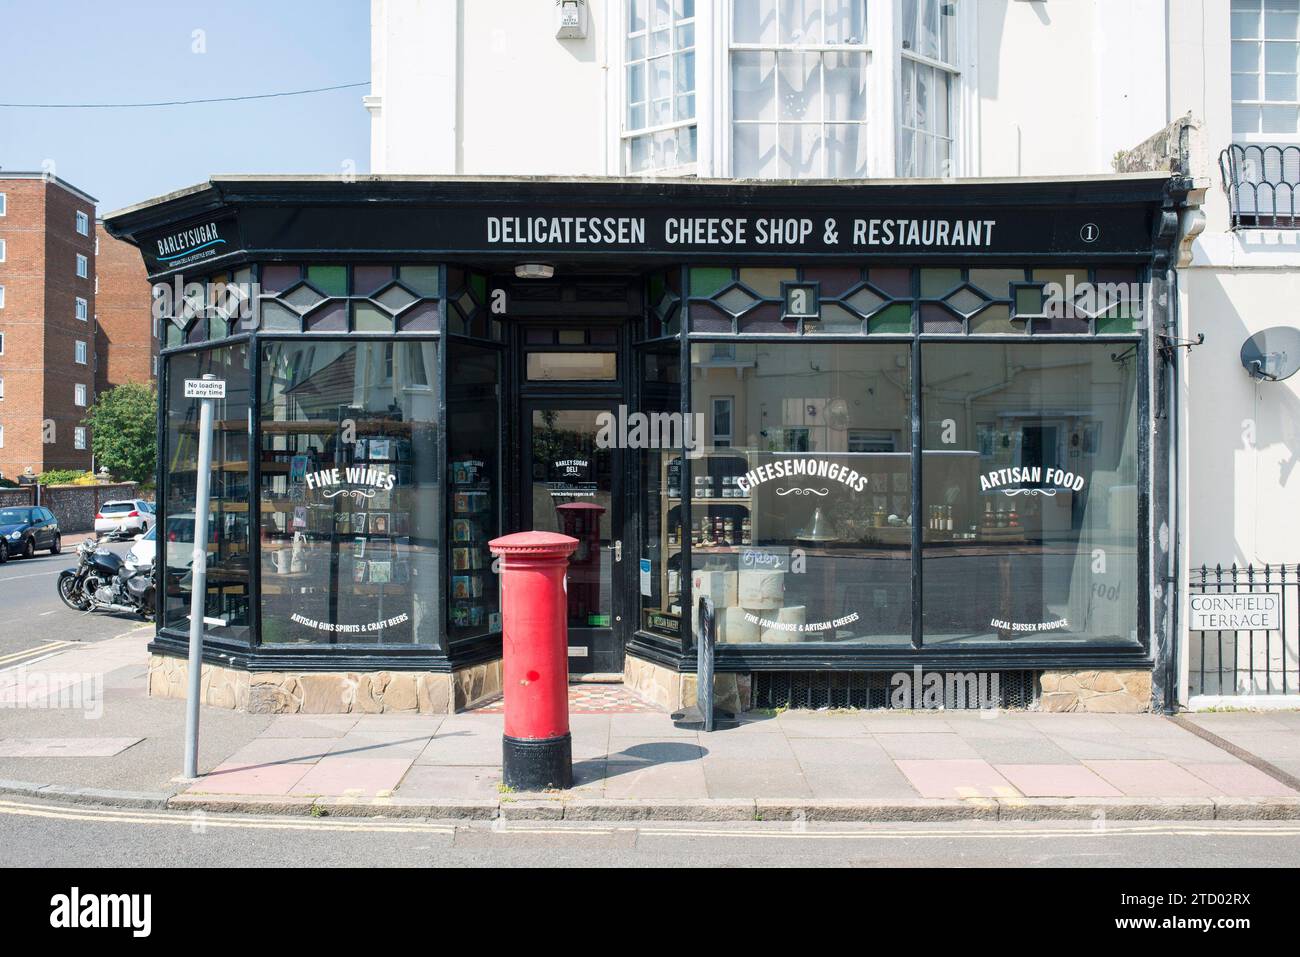 Exterior photography of a traditional coffee shop and delicatessen in Great Britain Stock Photo